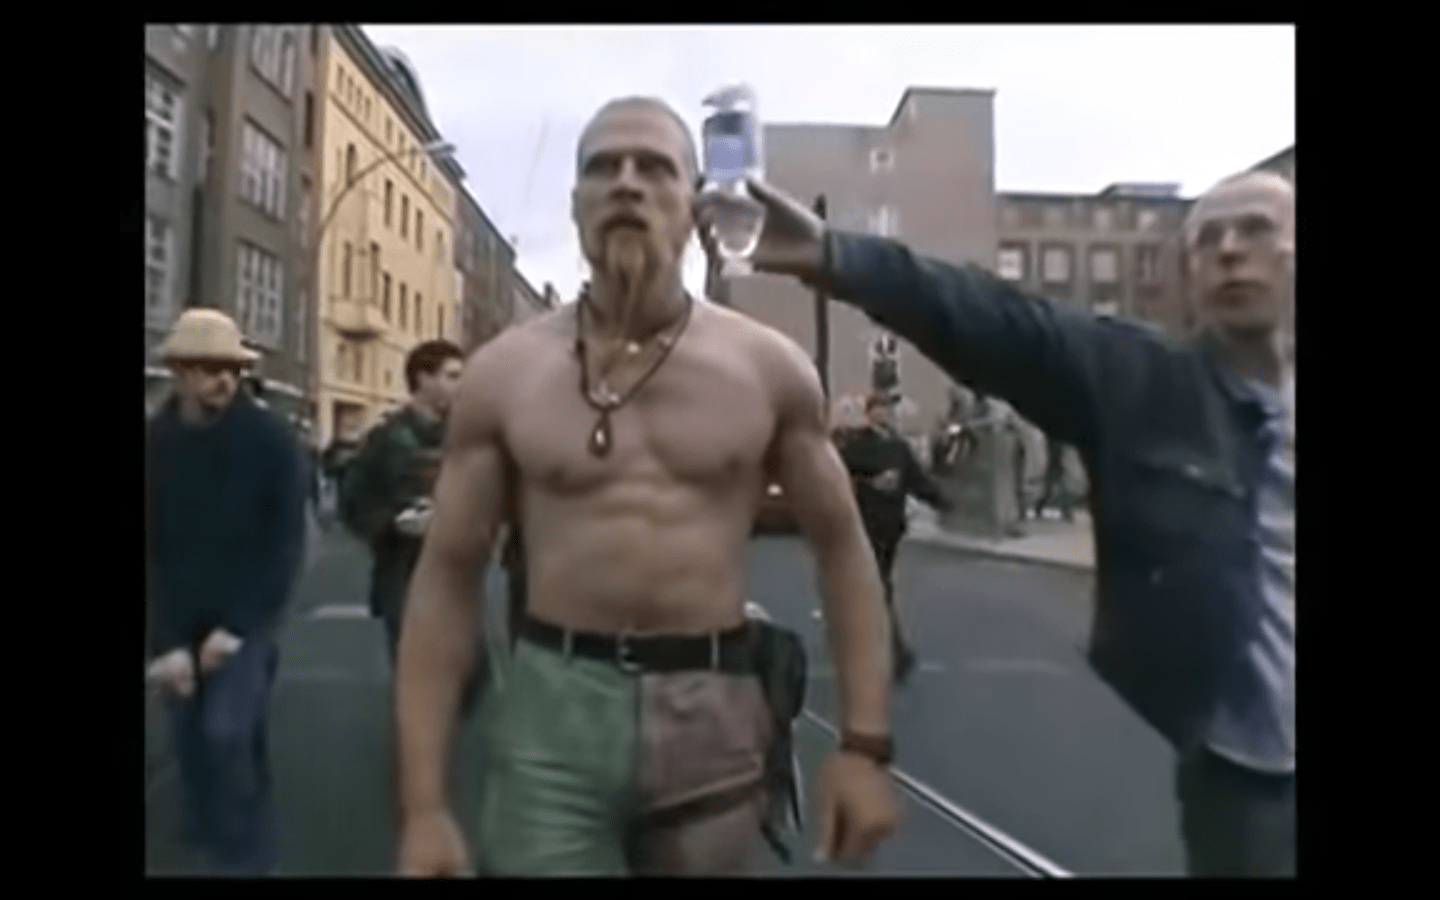 Over a decade later, I'm still fascinated by Techno Viking